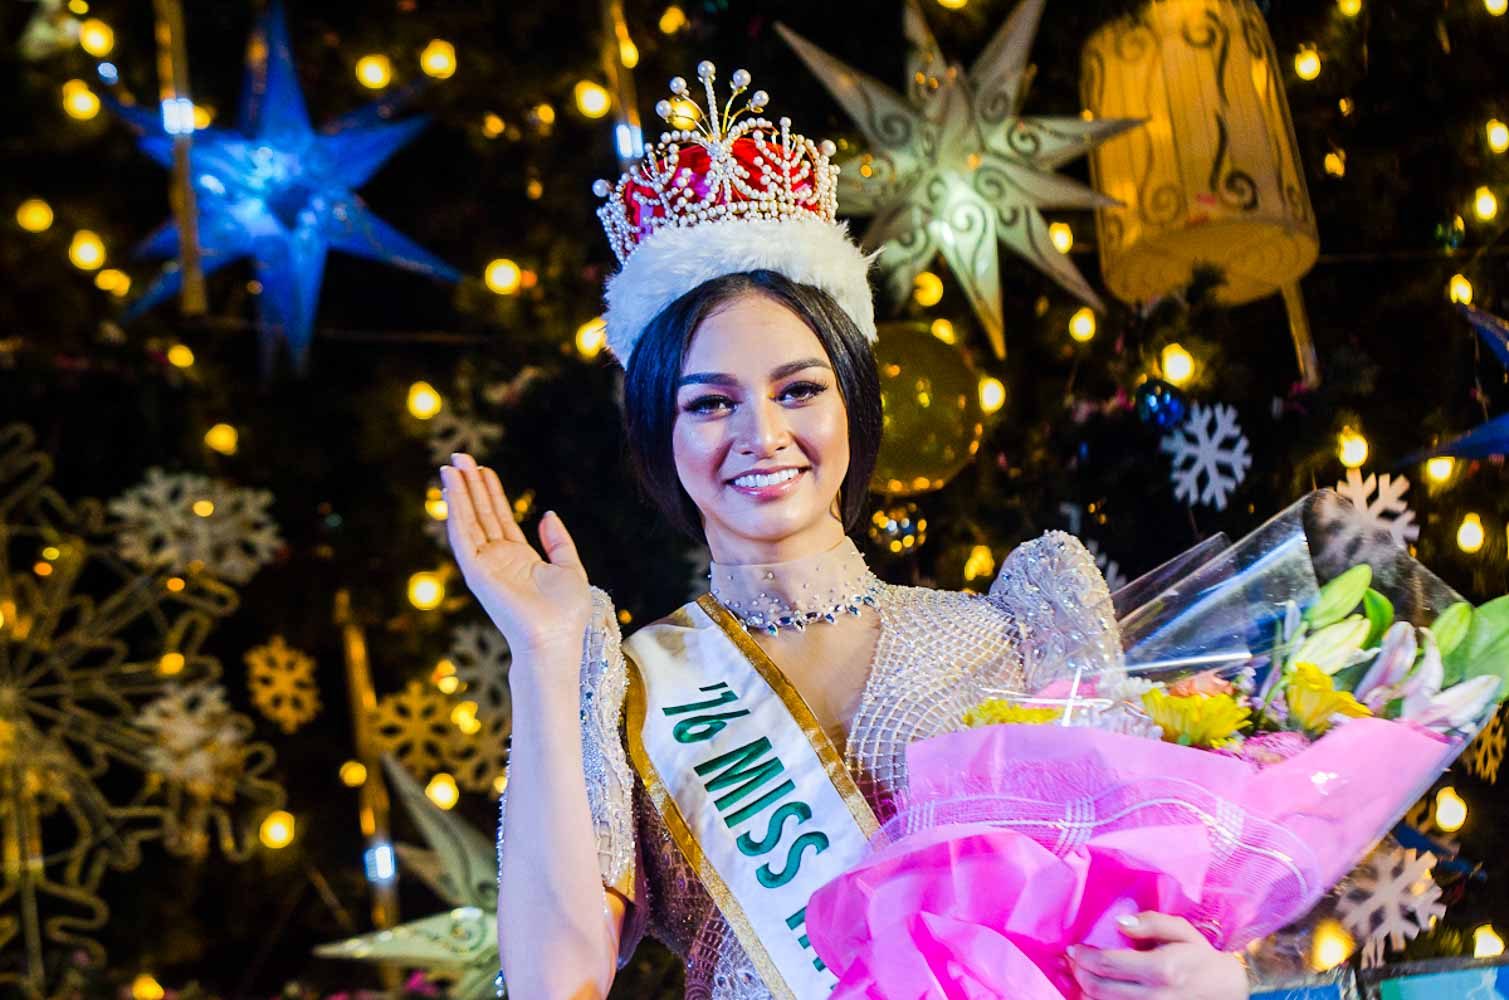 IN PHOTOS: Miss International 2016 Kylie Verzosa’s homecoming parade